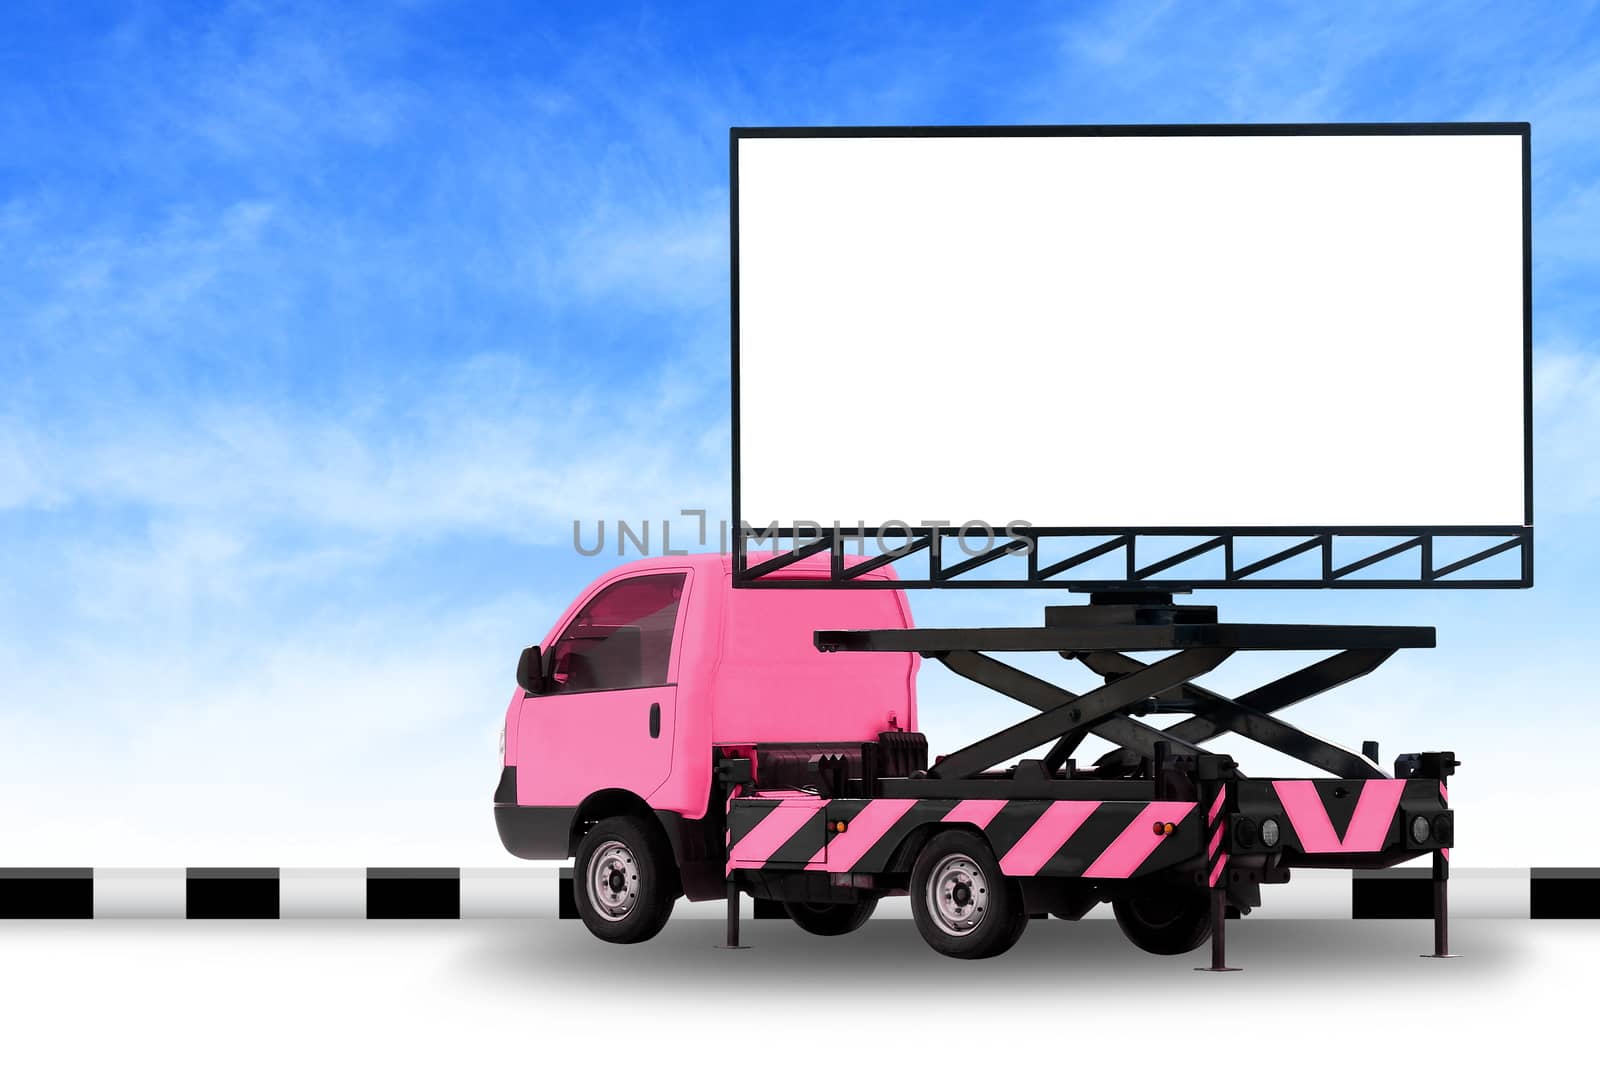 Billboard blank on car pink truck LED panel for sign Advertising isolated on background sky, Large banner and billboard Roadside for an advertisement large by cgdeaw